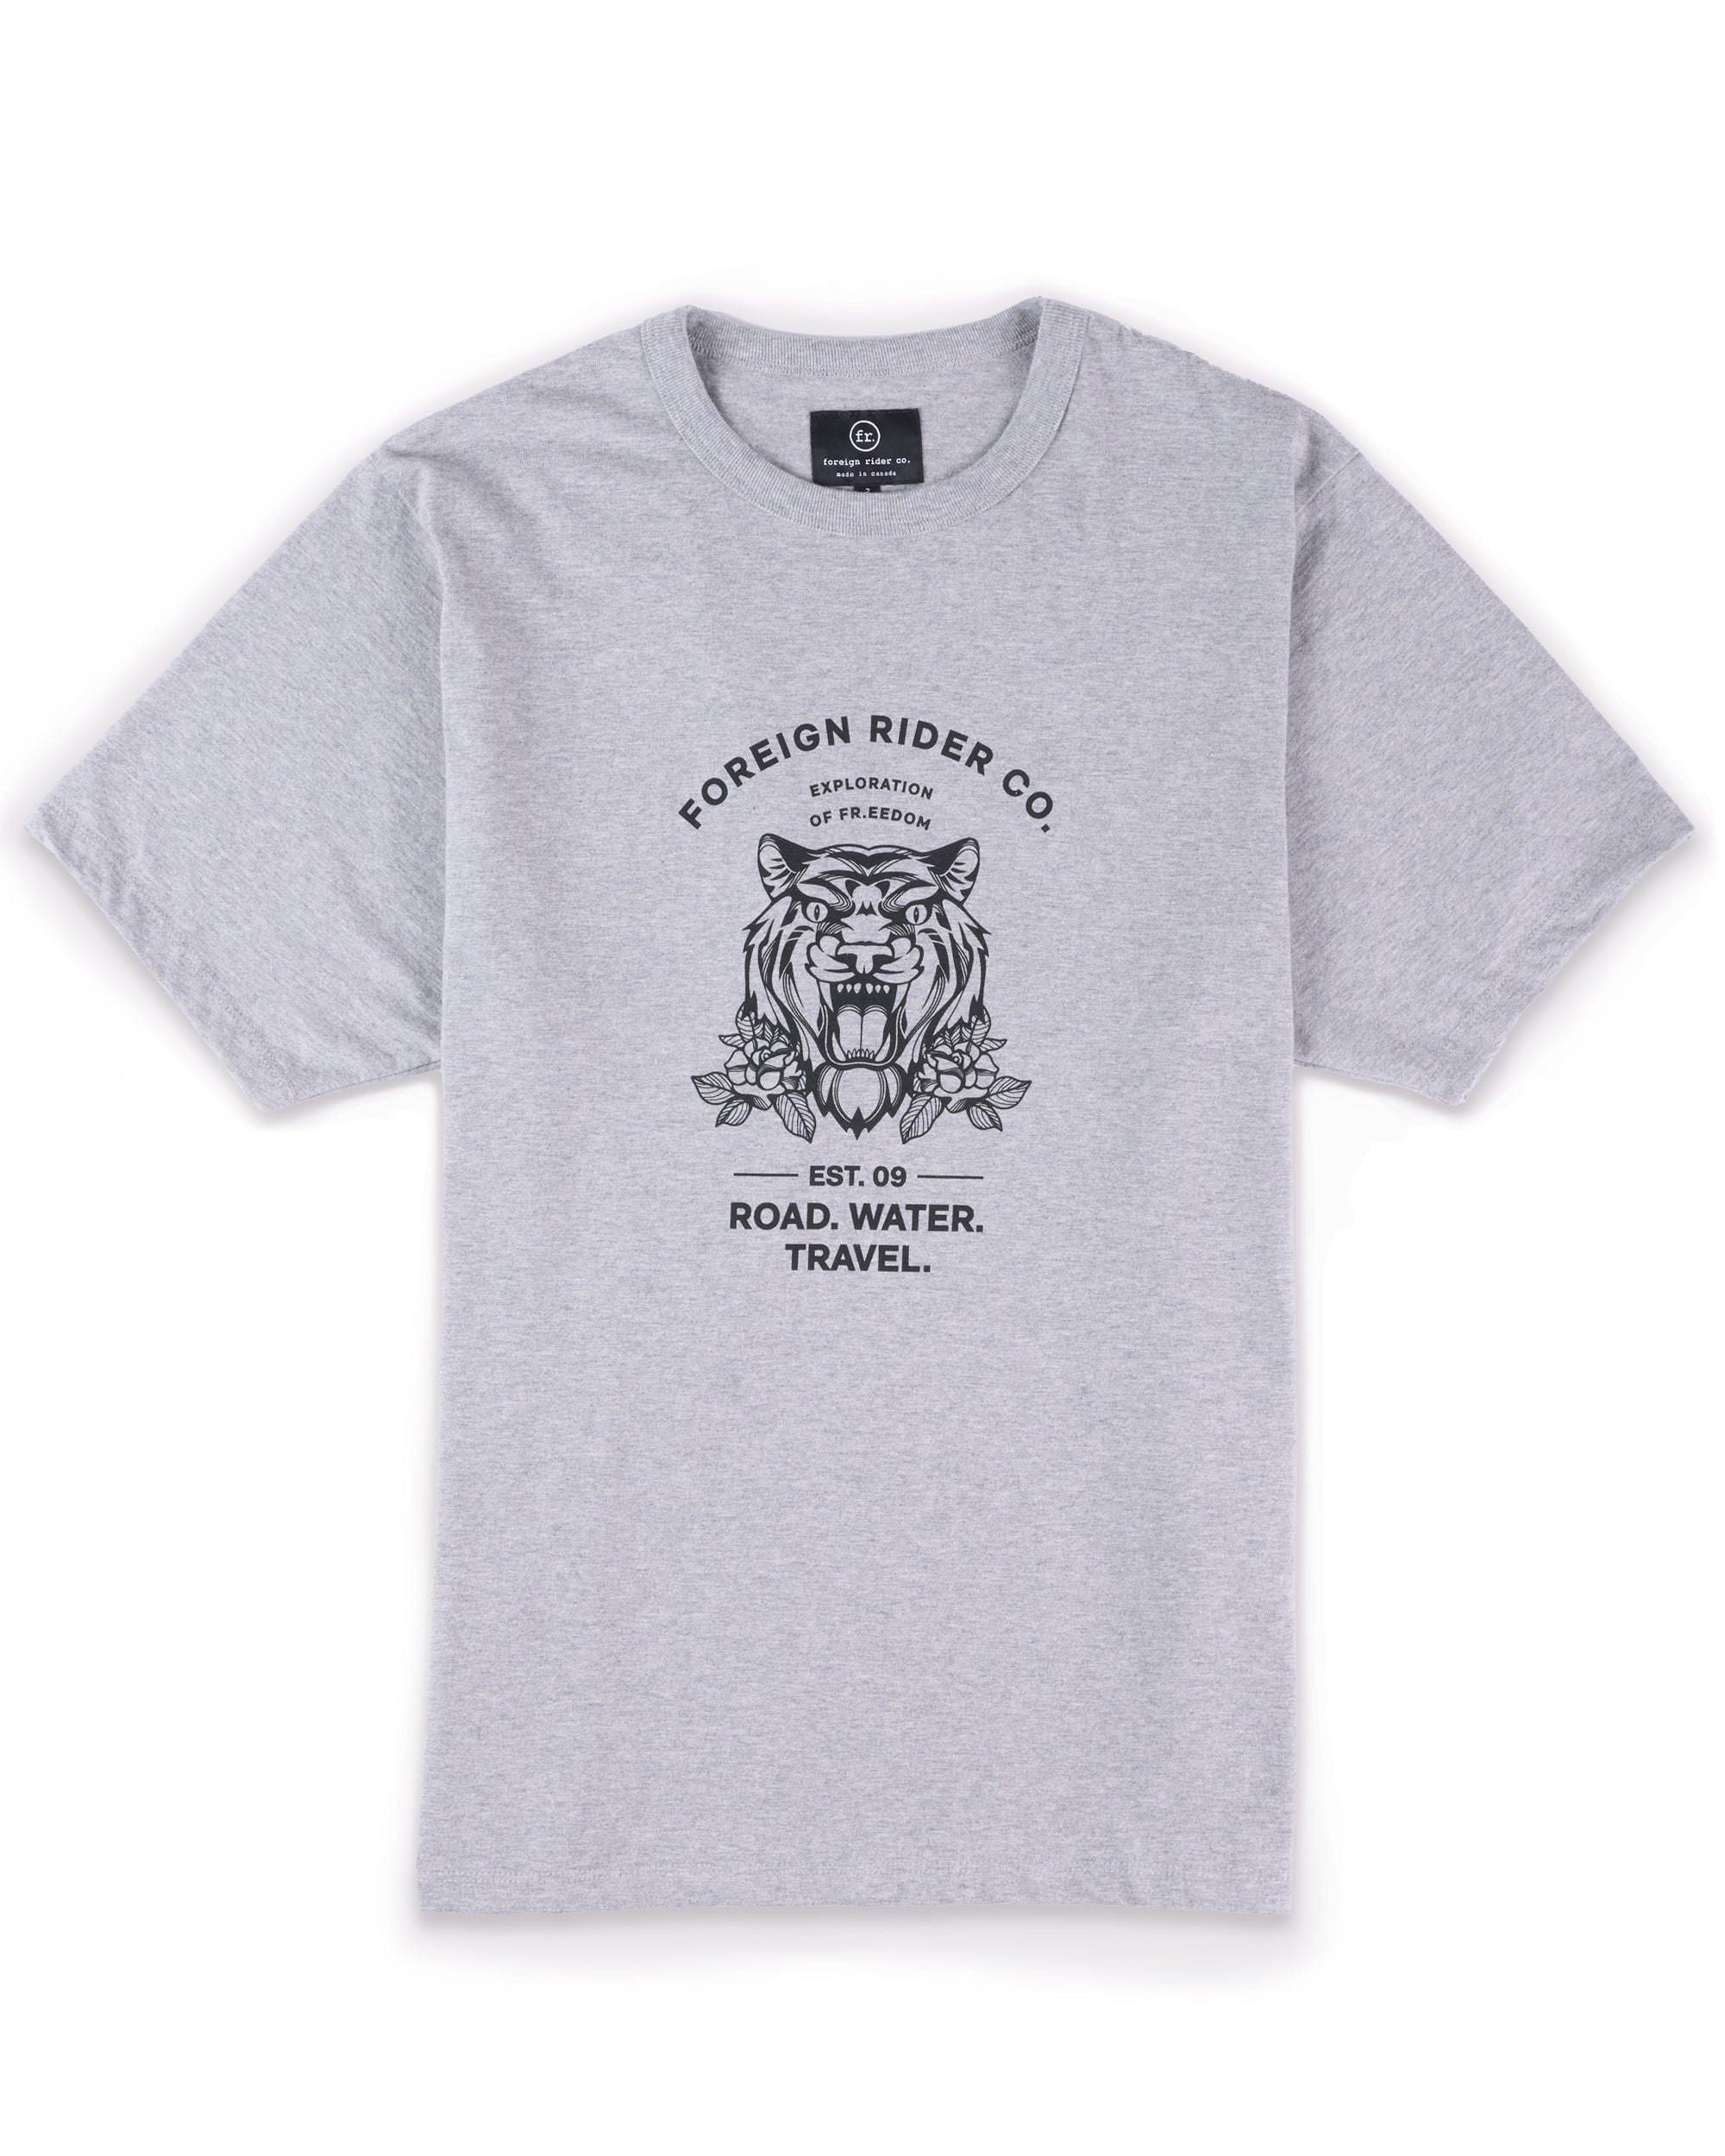 FR. Tiger Graphic T-Shirt Grey Heather - Foreign Rider Co.